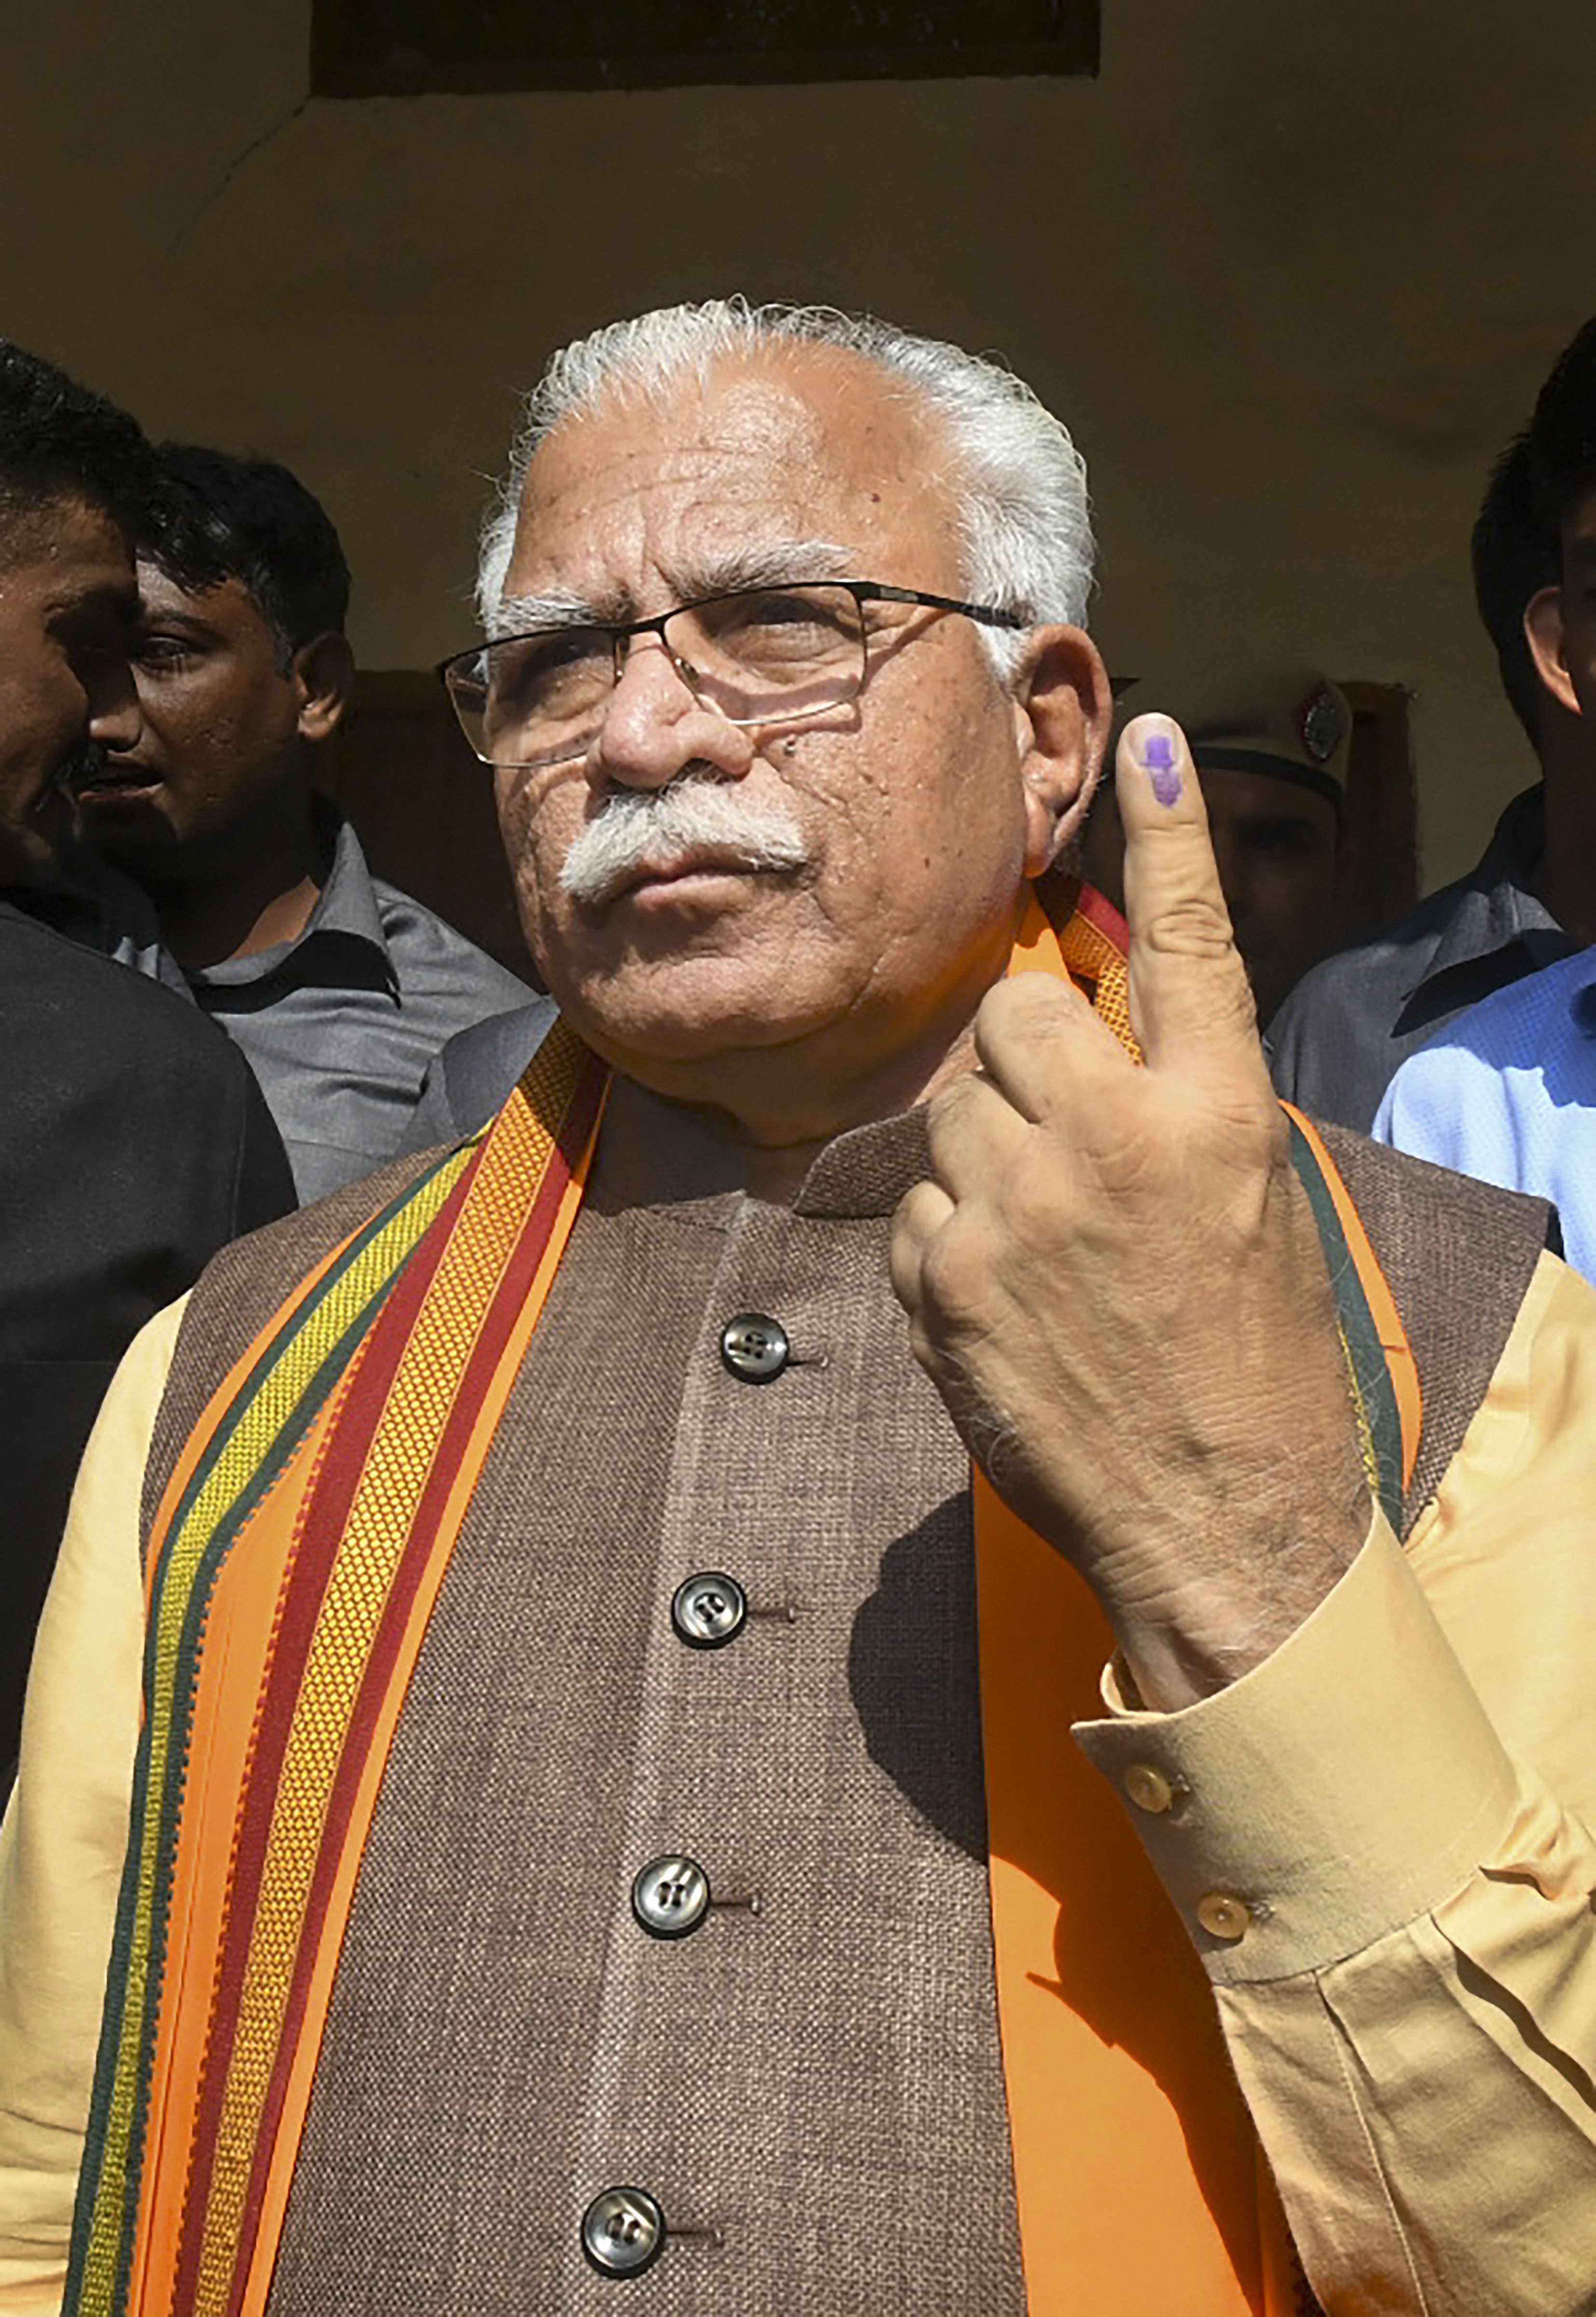 Haryana chief minister Manohar Lal Khattar shows his finger marked with indelible ink after casting his vote during the Haryana Assembly elections, in Karnal district, Monday, October 21, 2019.